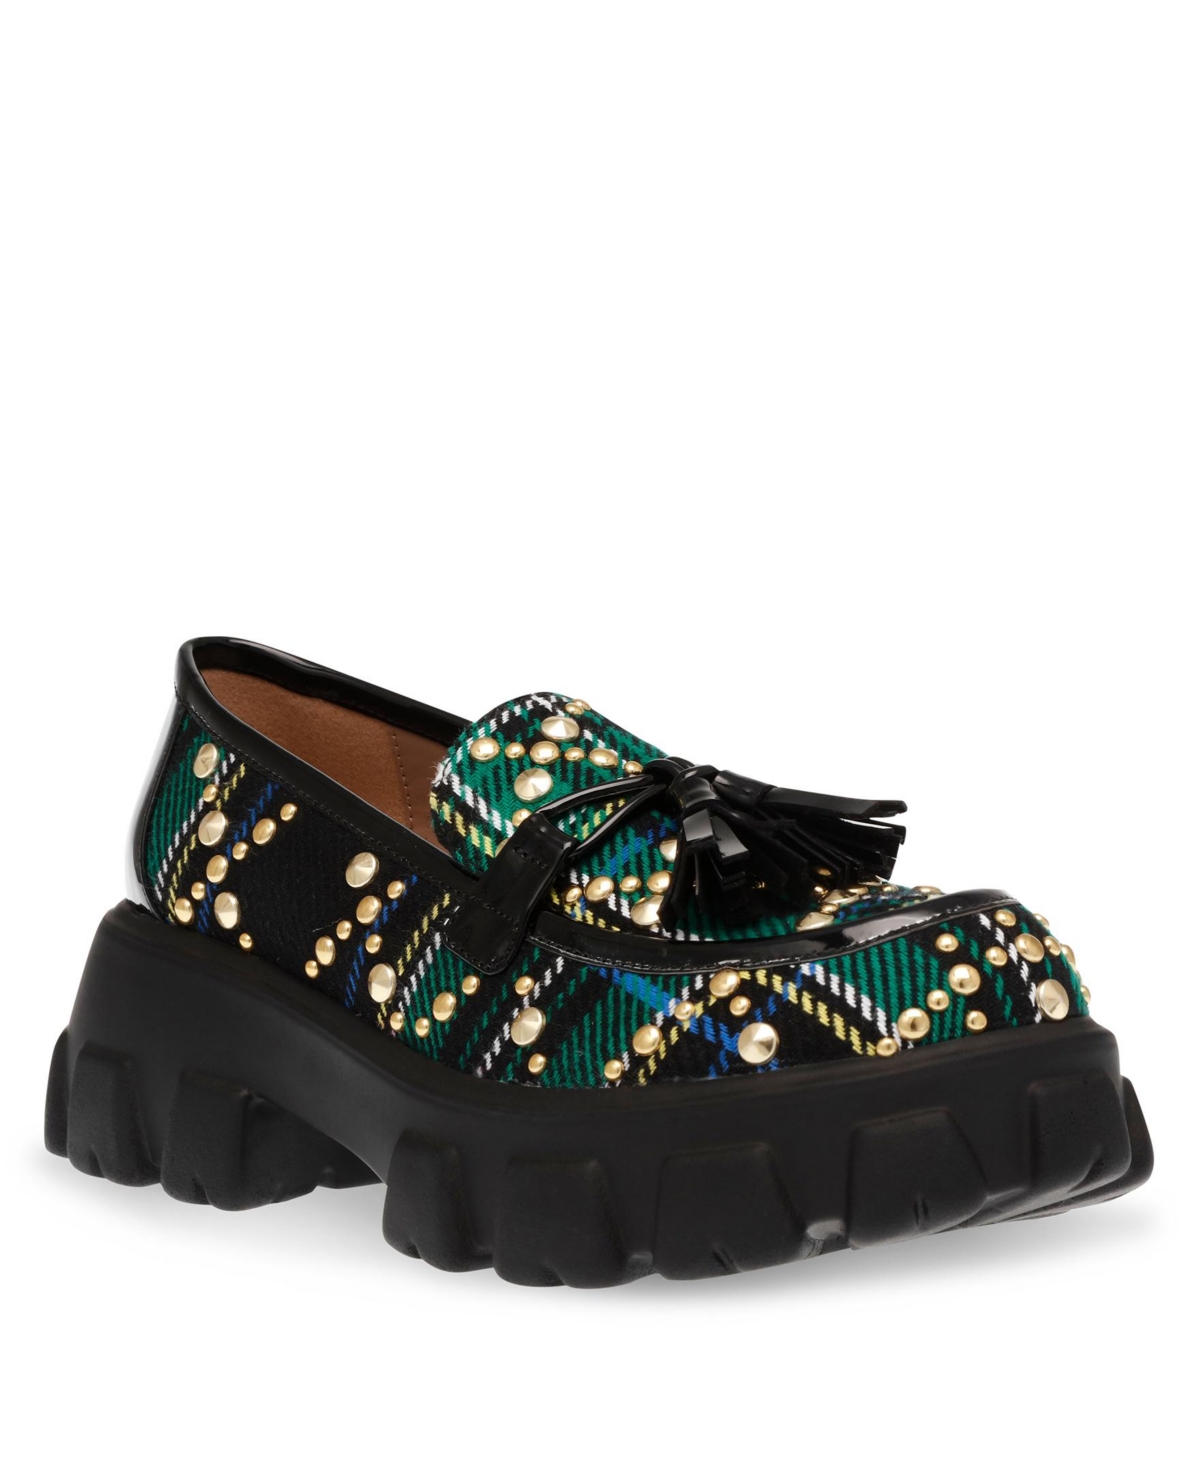 Women's Aleah Plaid Loafer with Studs - Green, Black Multi